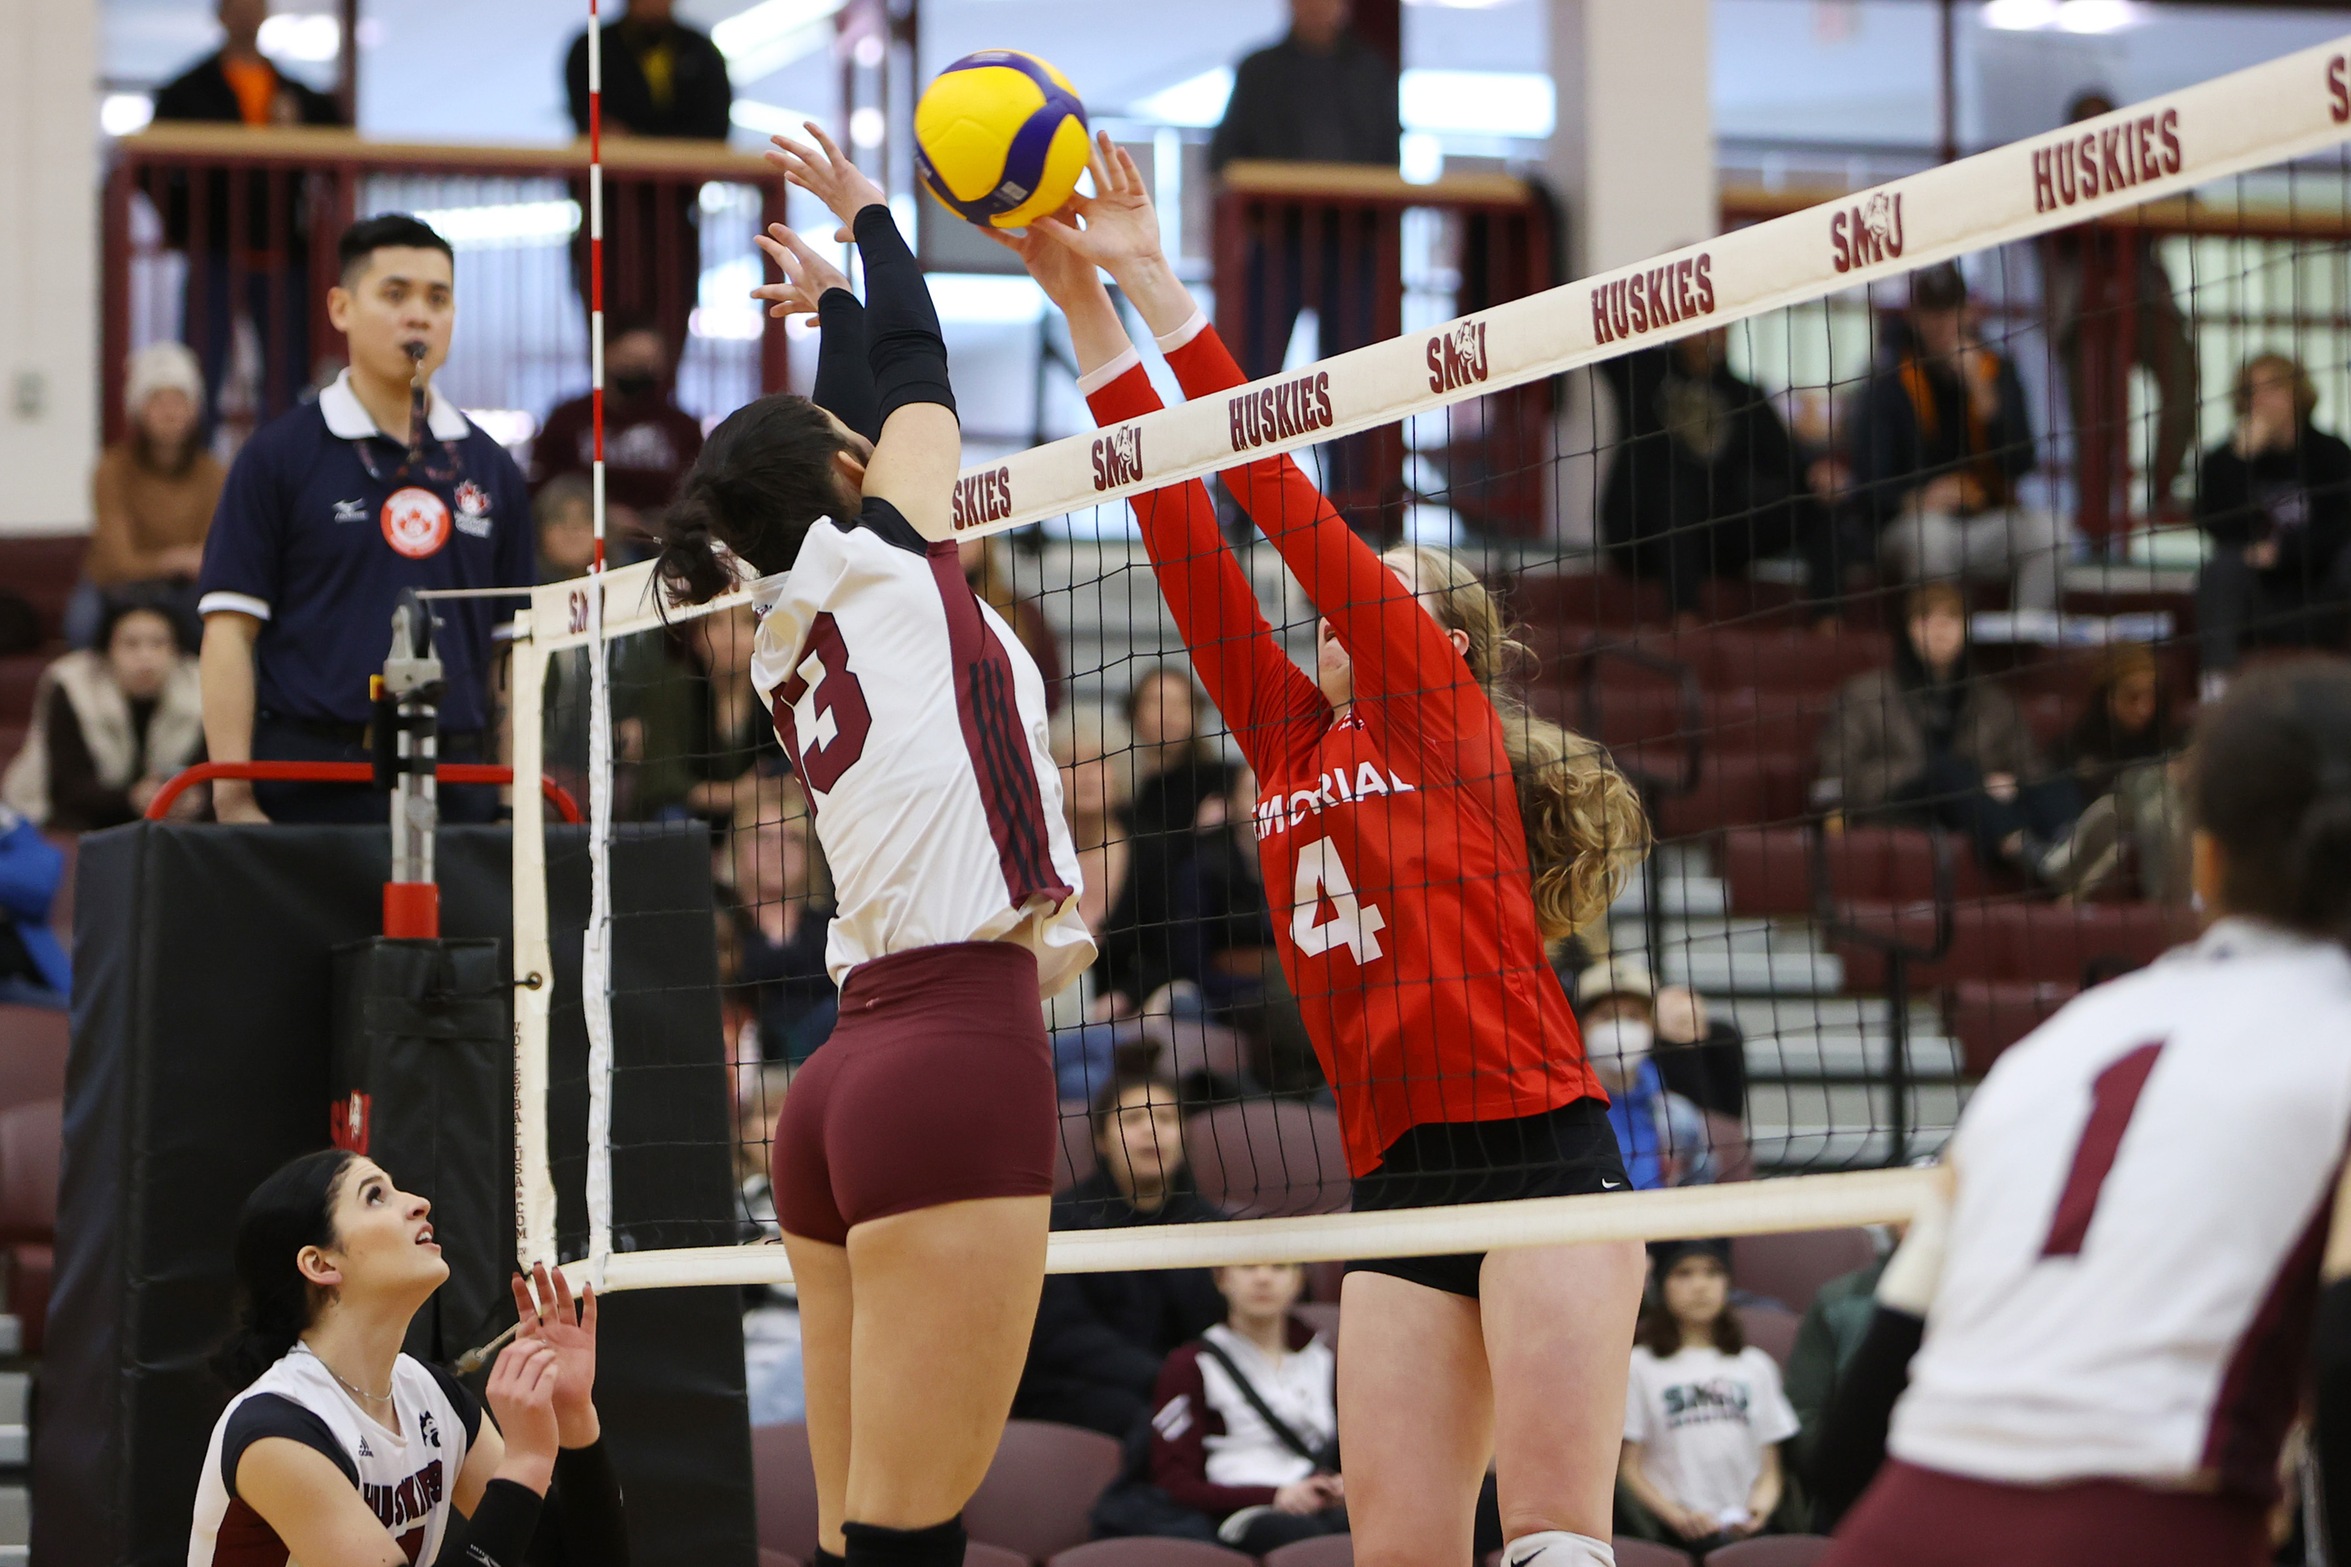 Huskies defeat Sea-Hawks in straight sets for seventh straight win